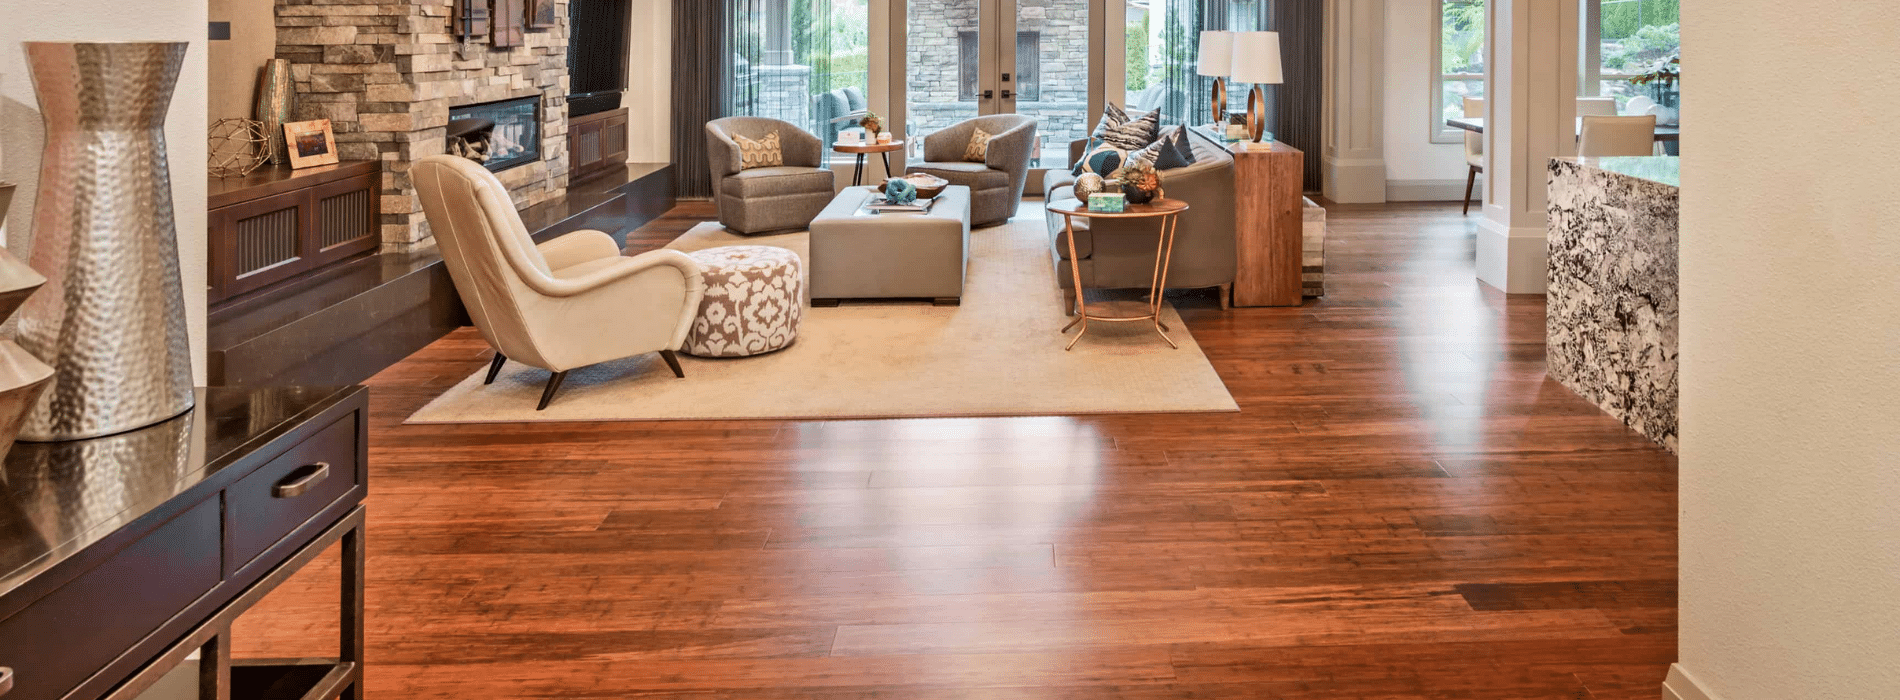 Remarkable restoration of 5-year-old engineered oak floors by Lewisham SE13 Mr Sander®. Meticulous care unveils their natural beauty. Warmth and allure enhanced with mid-oak stain. Junckers Strong satin finish adds durability.